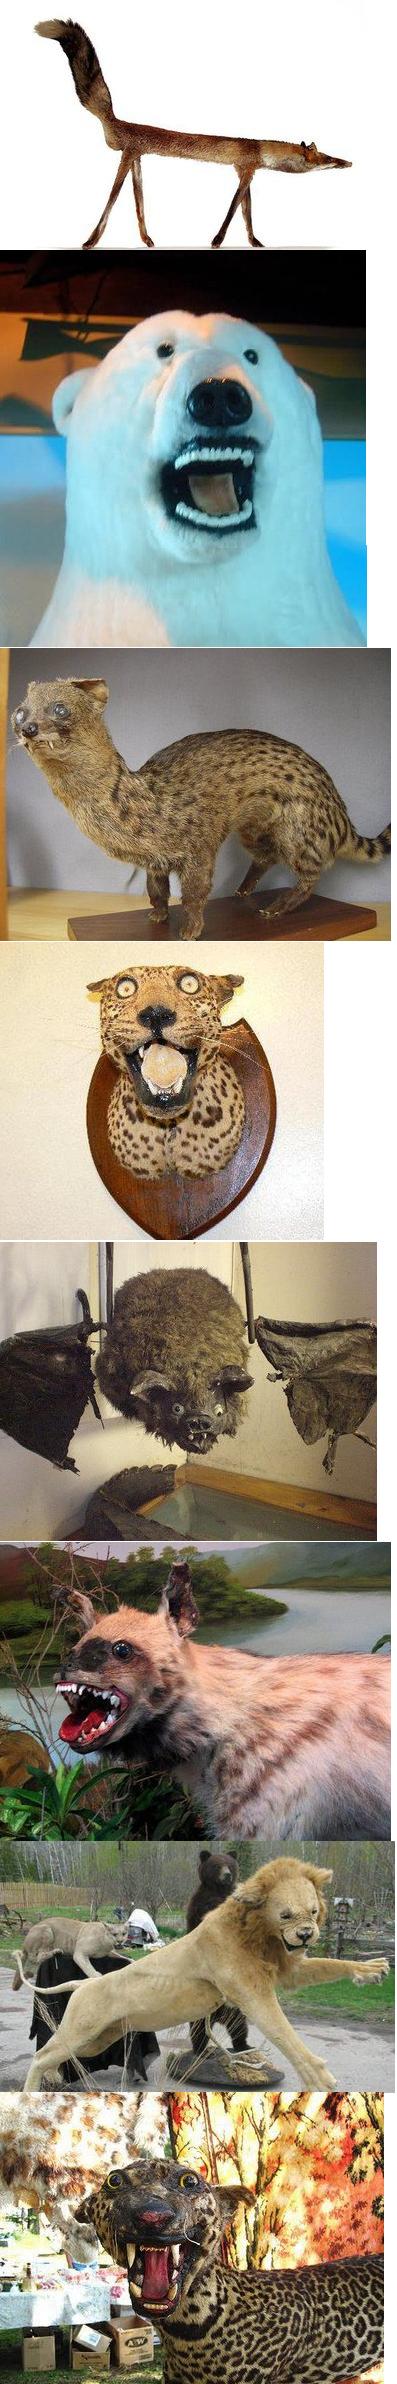 Taxidermy at its best